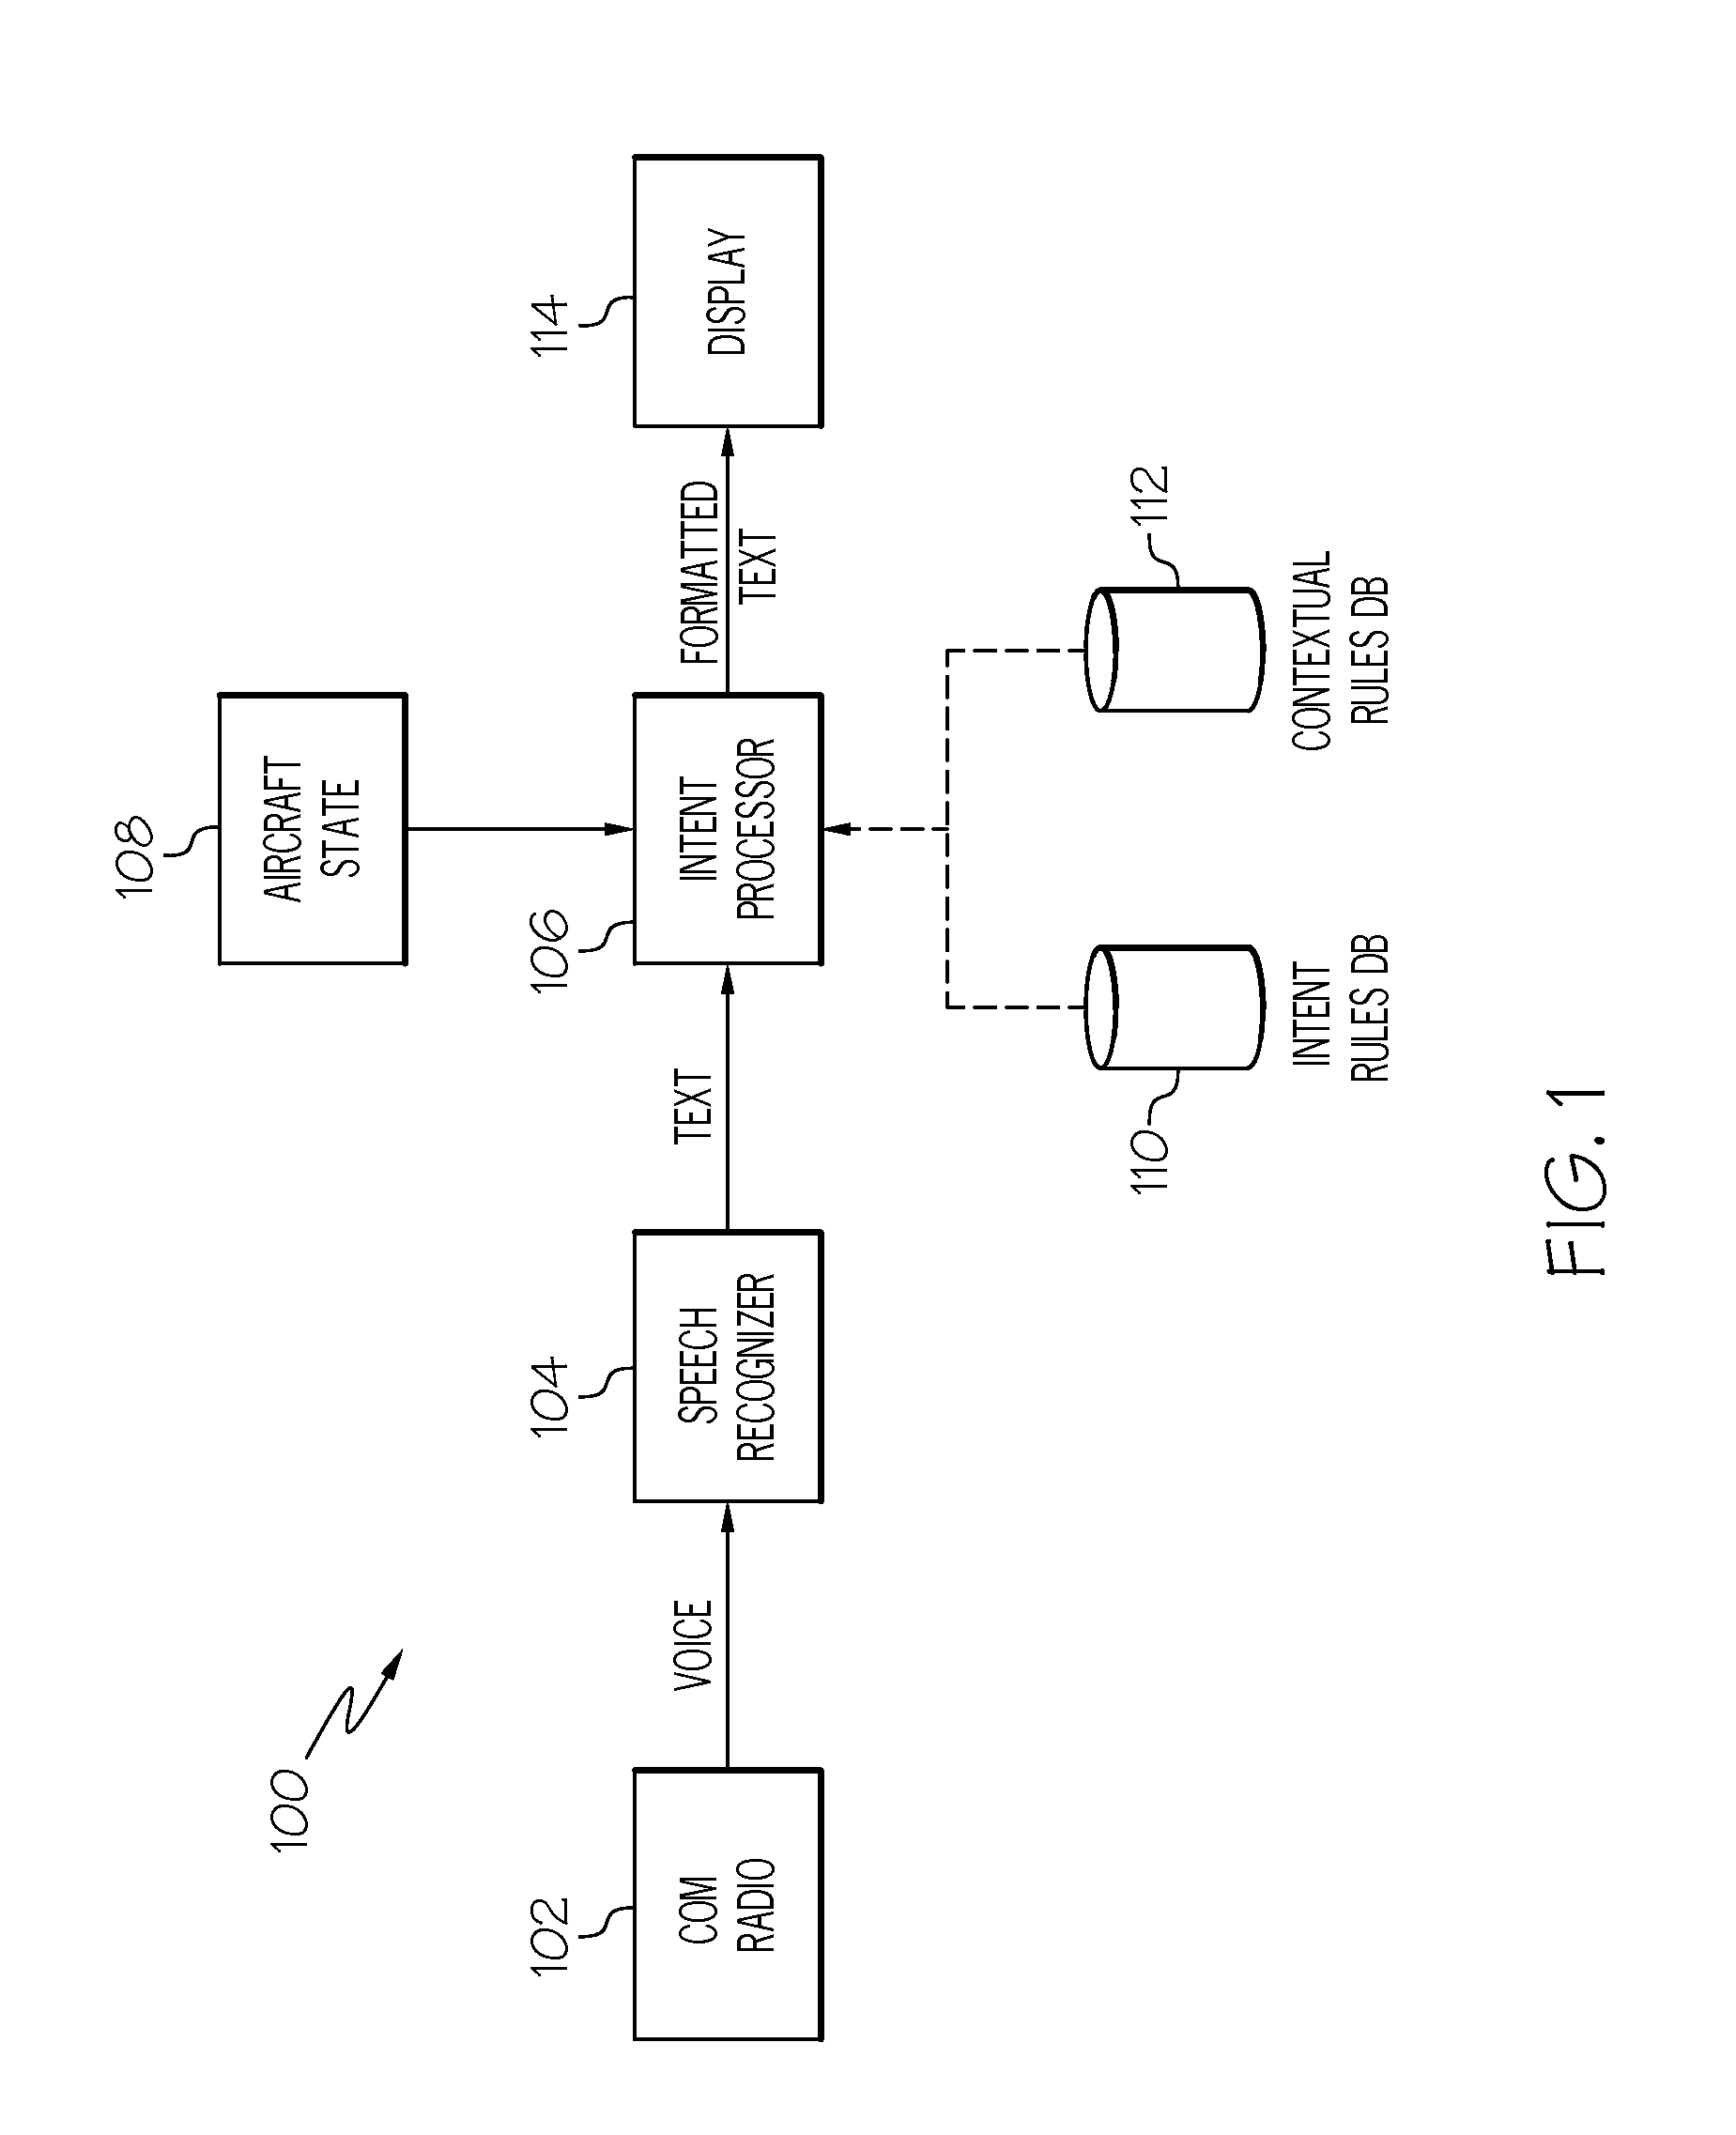 System and method for textually and graphically presenting air traffic control voice information